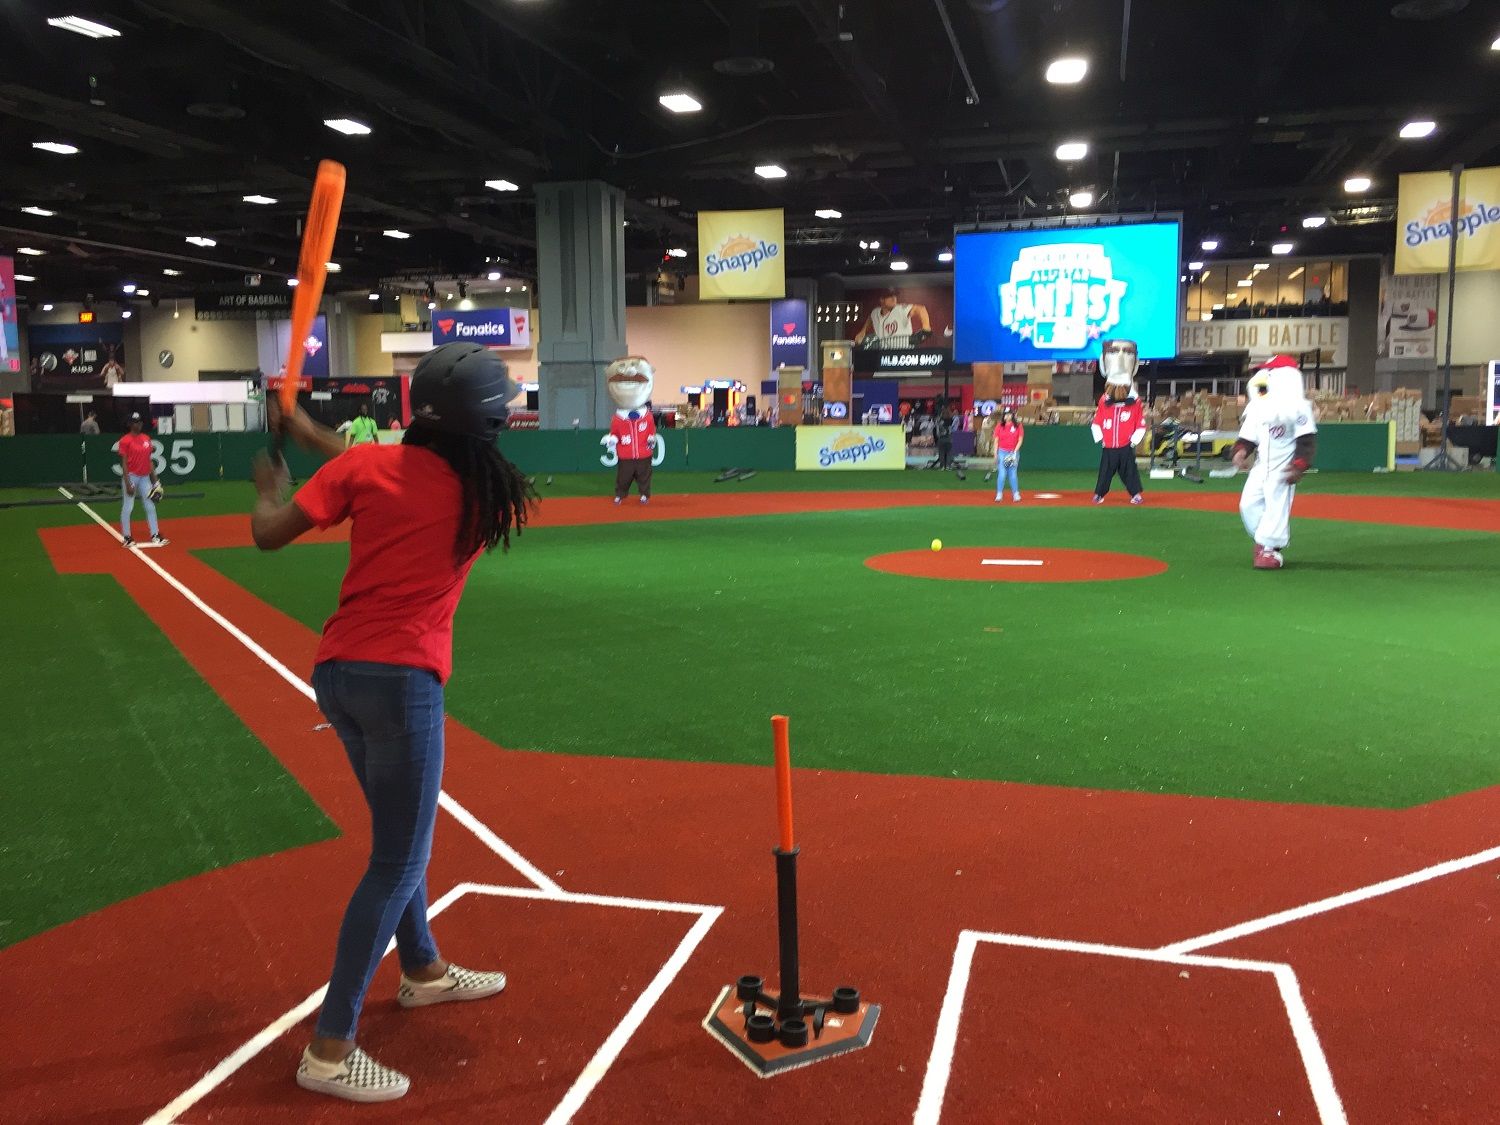 There are numerous practice diamonds around the All-Star FanFest space for participants to hit and field. (WTOP/Kristi King)